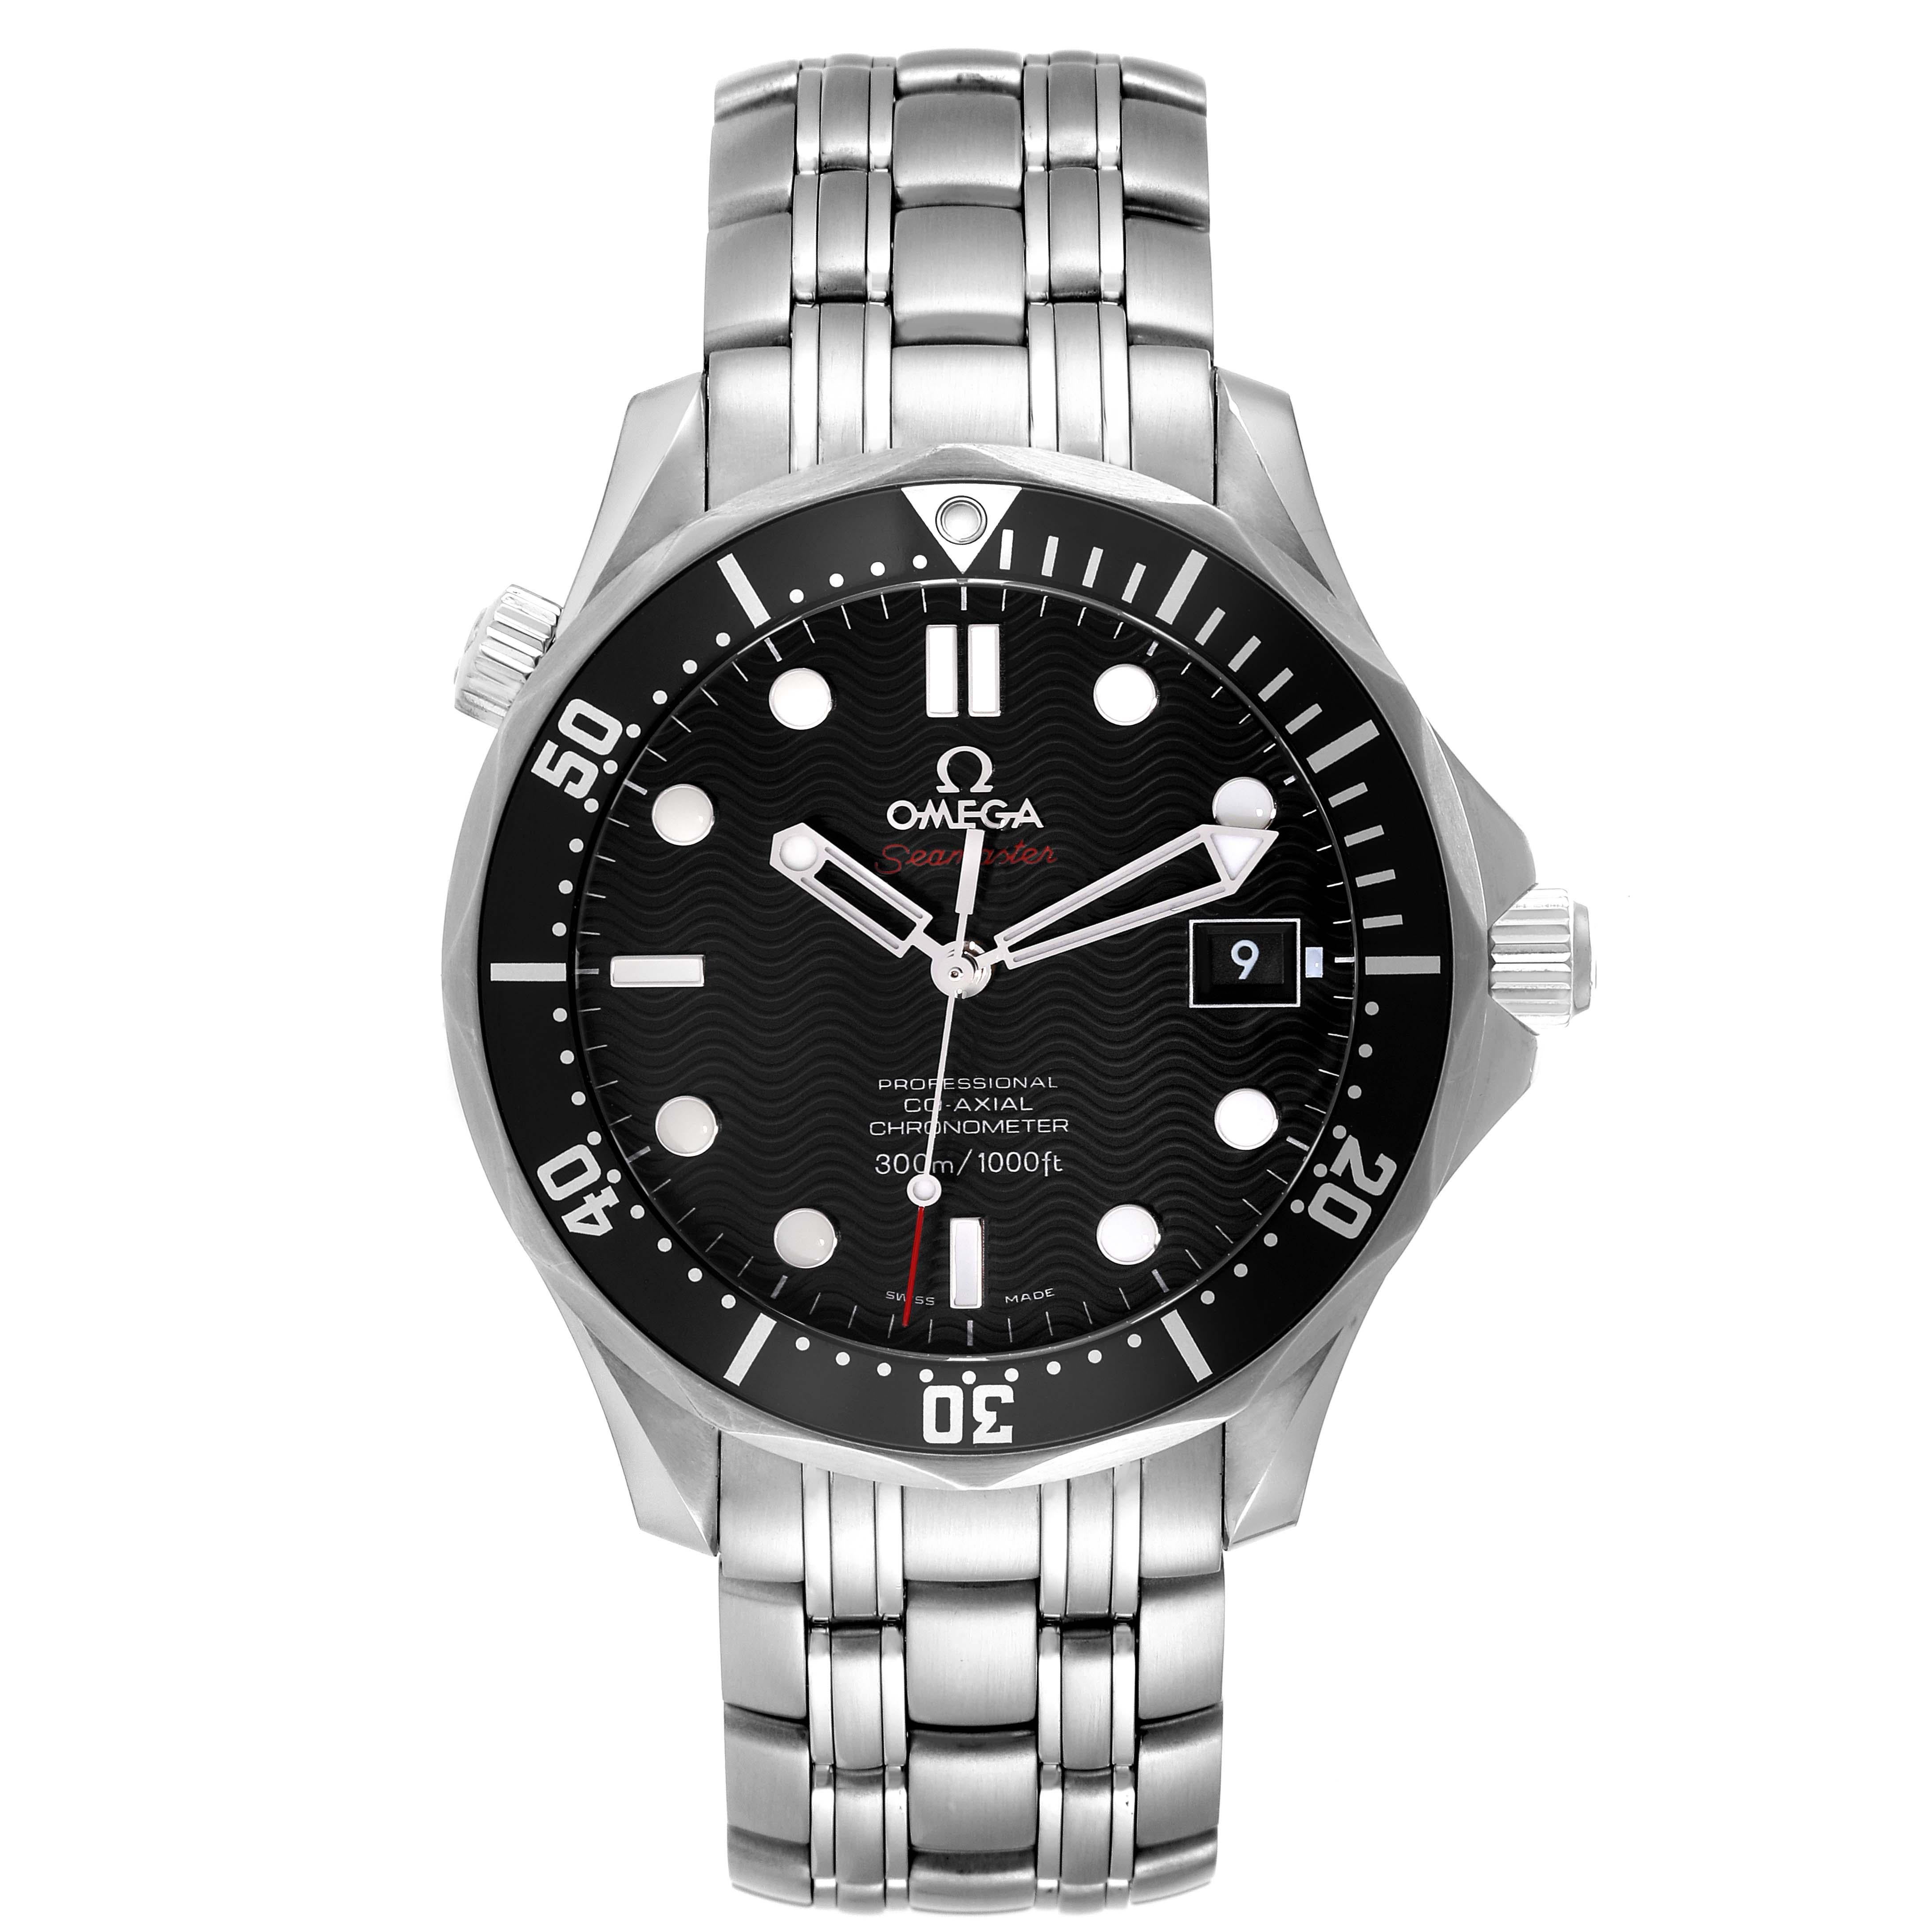 Omega Seamaster Black Dial Steel Mens Watch 212.30.41.20.01.002 Card. Automatic self-winding movement. Stainless steel case 41.0 mm in diameter. Helium escape valve at 10 o'clock. Omega logo on the crown. Black unidirectional rotating bezel. Scratch